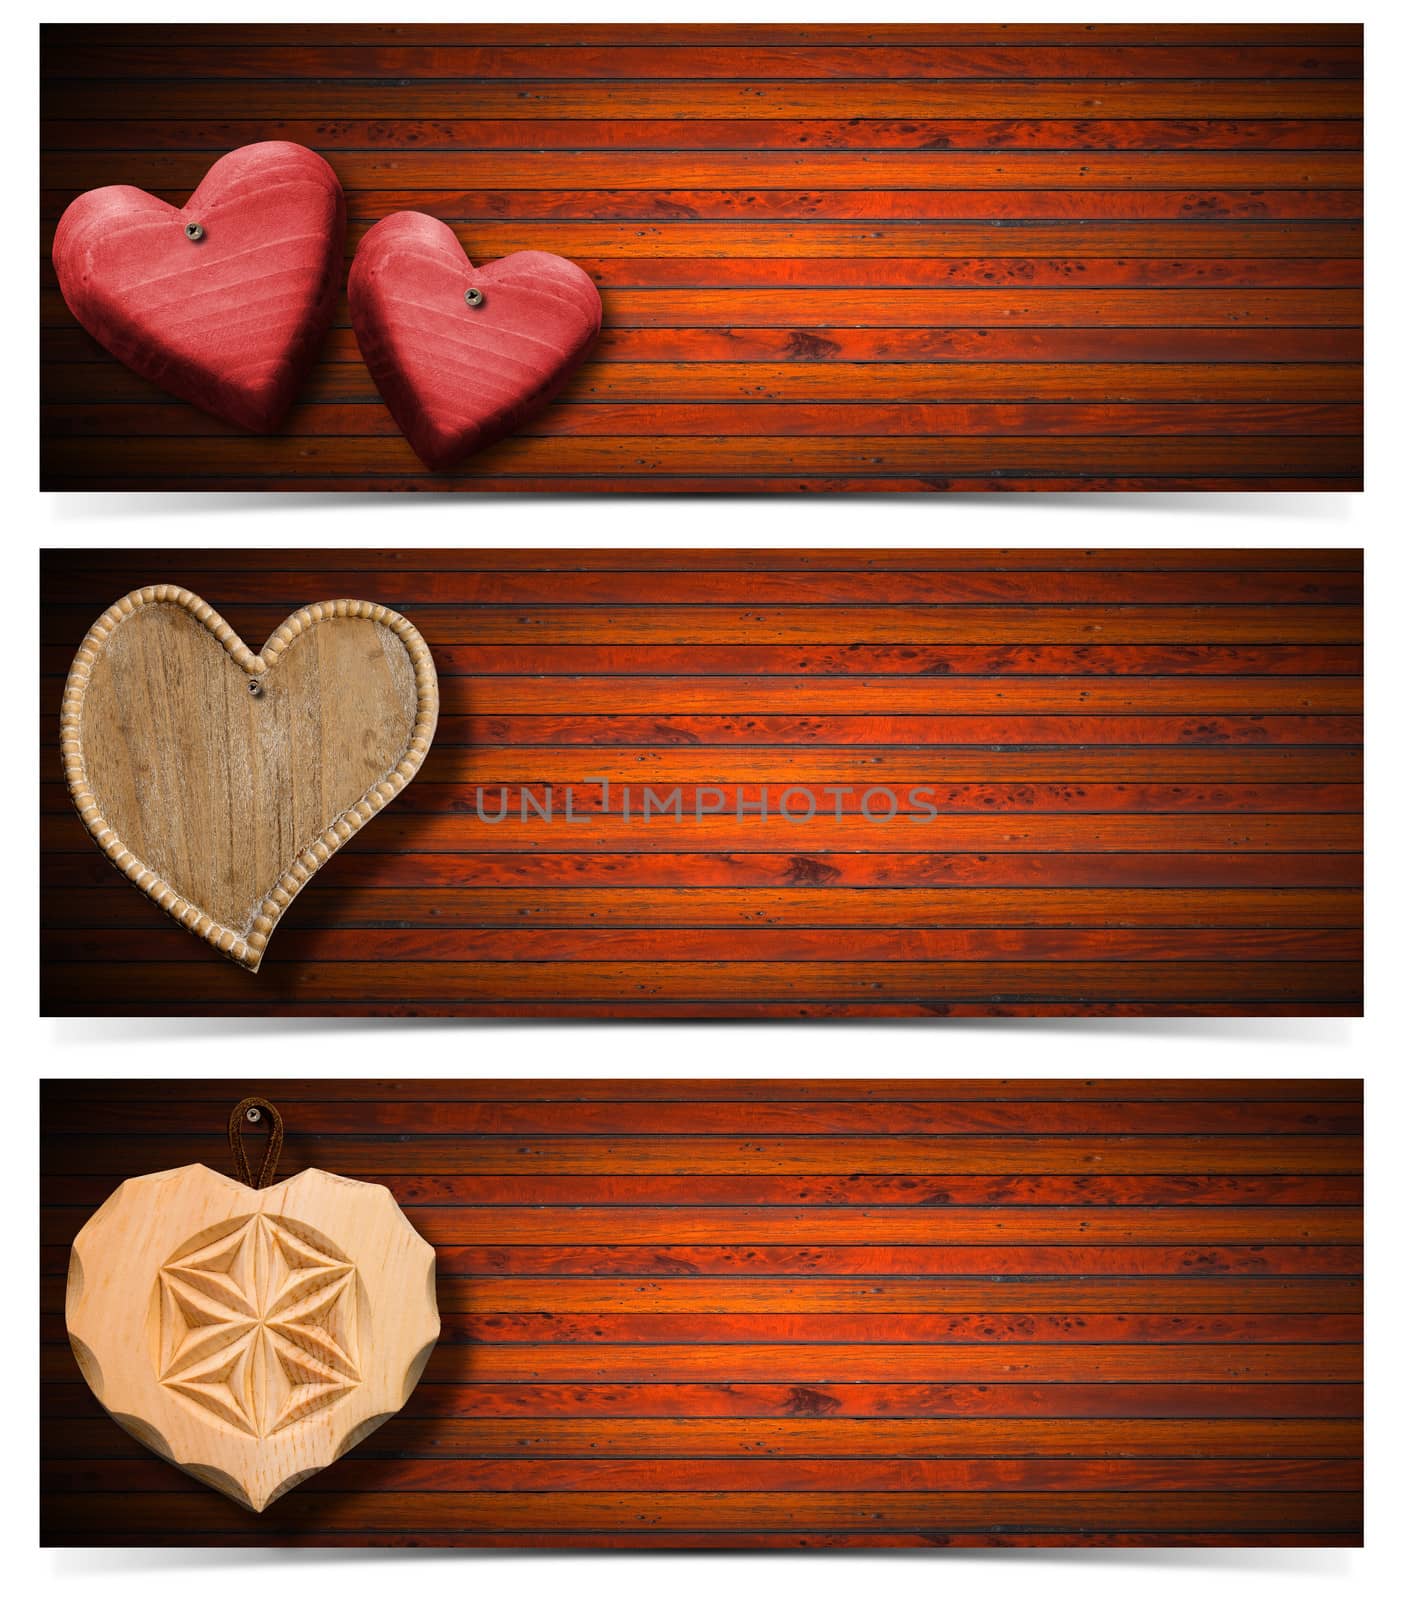 Handmade wooden hearts hanging on brown wooden background - Three banners
